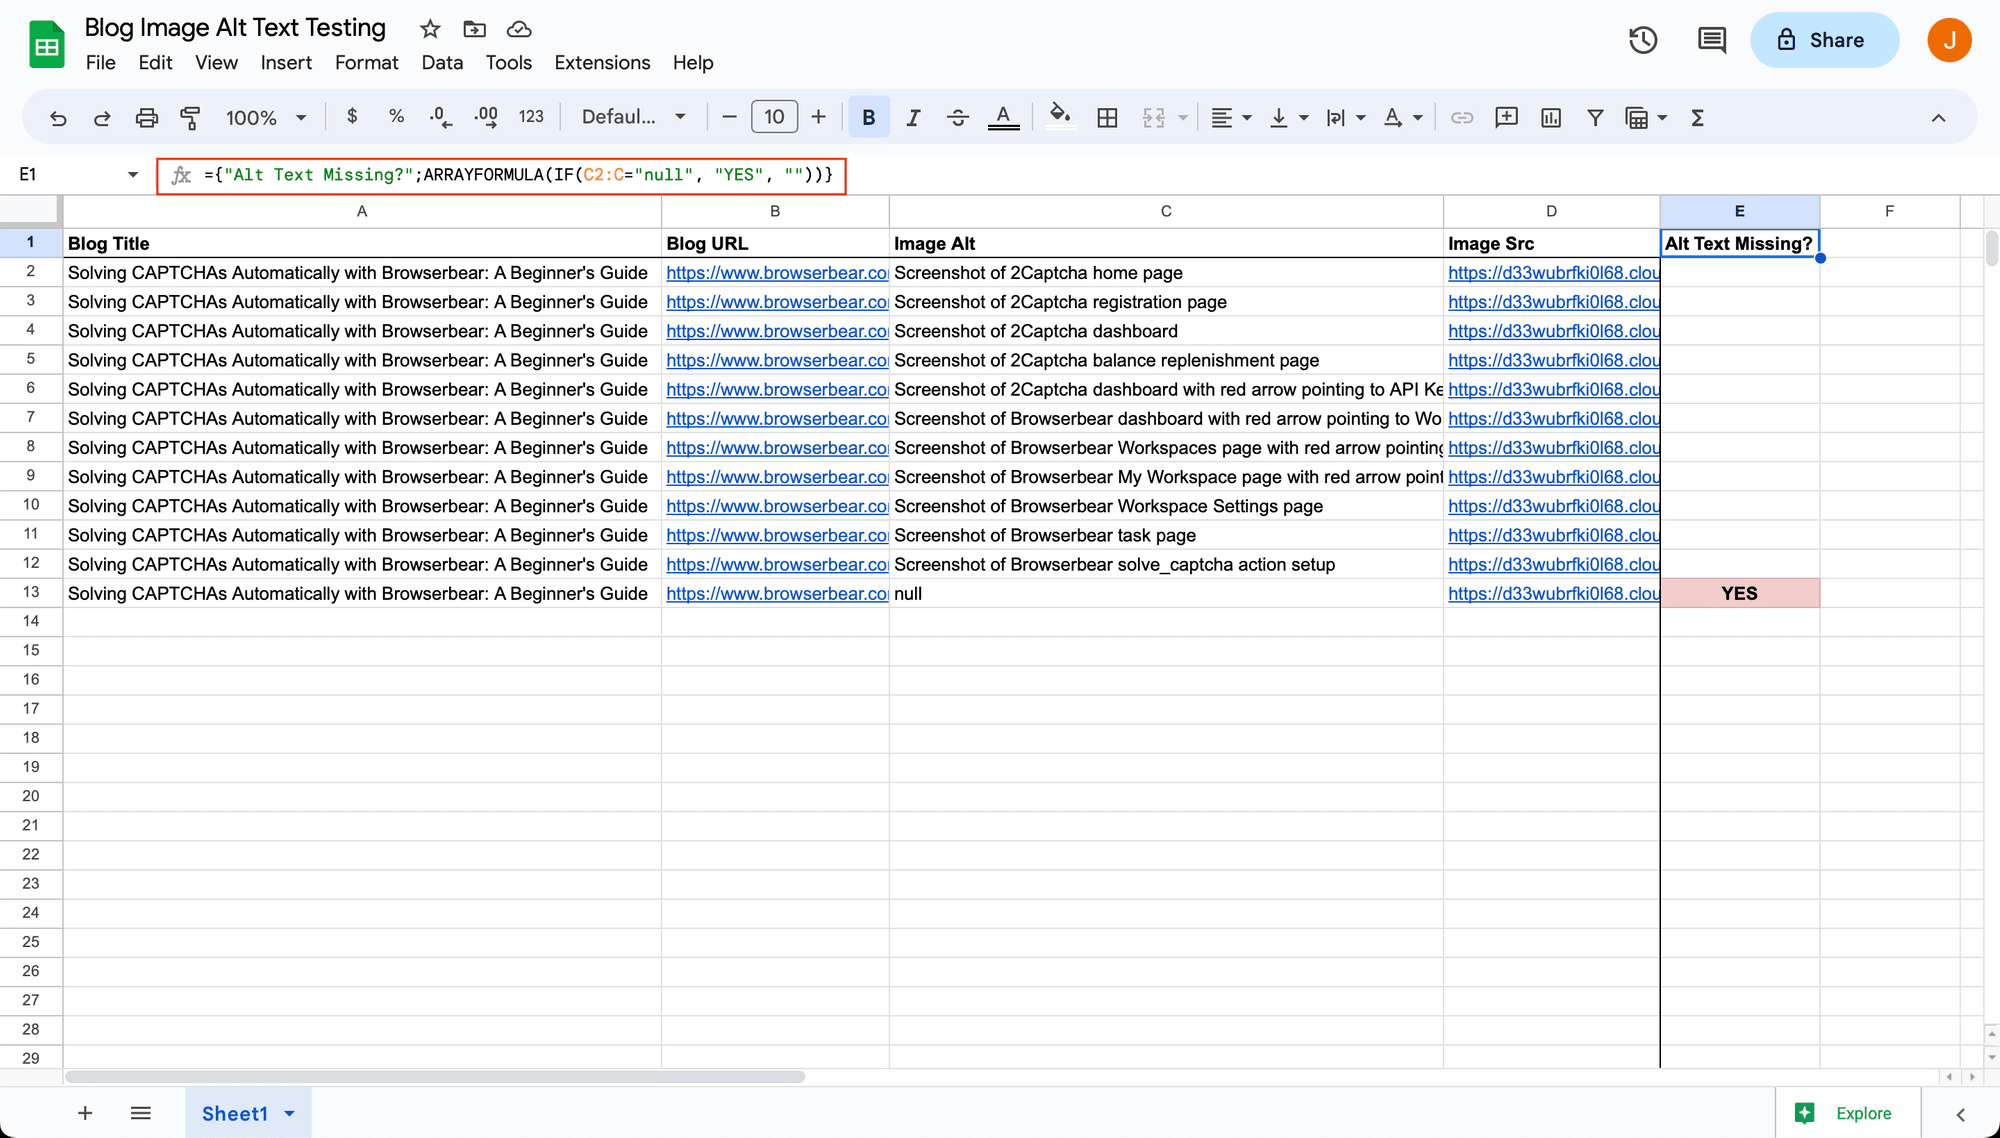 Screenshot of Google Sheets spreadsheet with alt text missing formula outlined in red